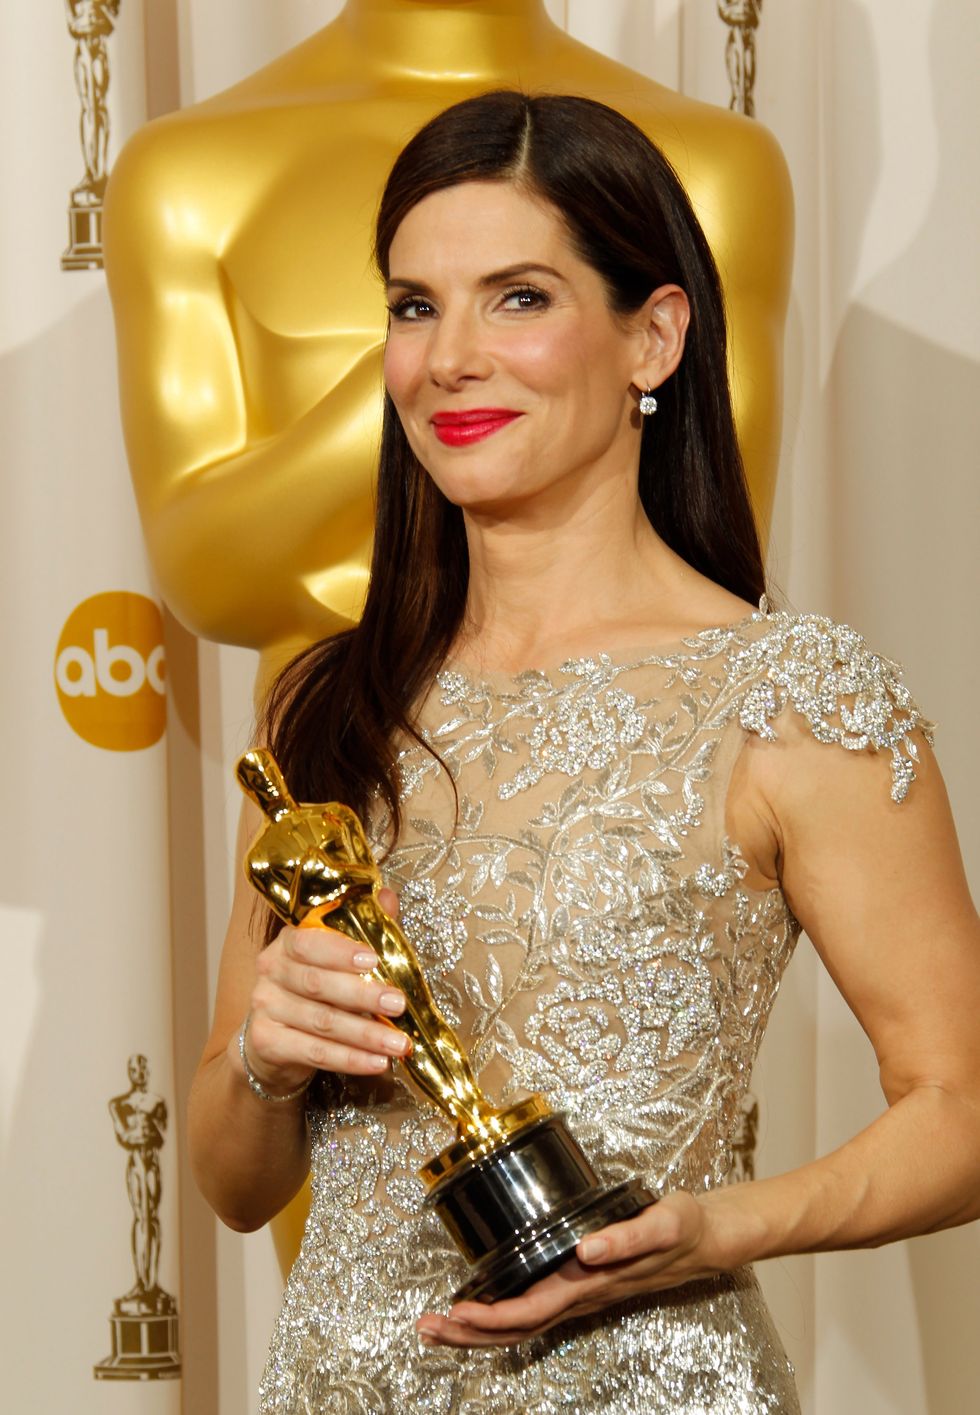 Sandra Bullock Movies: A Guide to the Oscar Winner's Best Roles